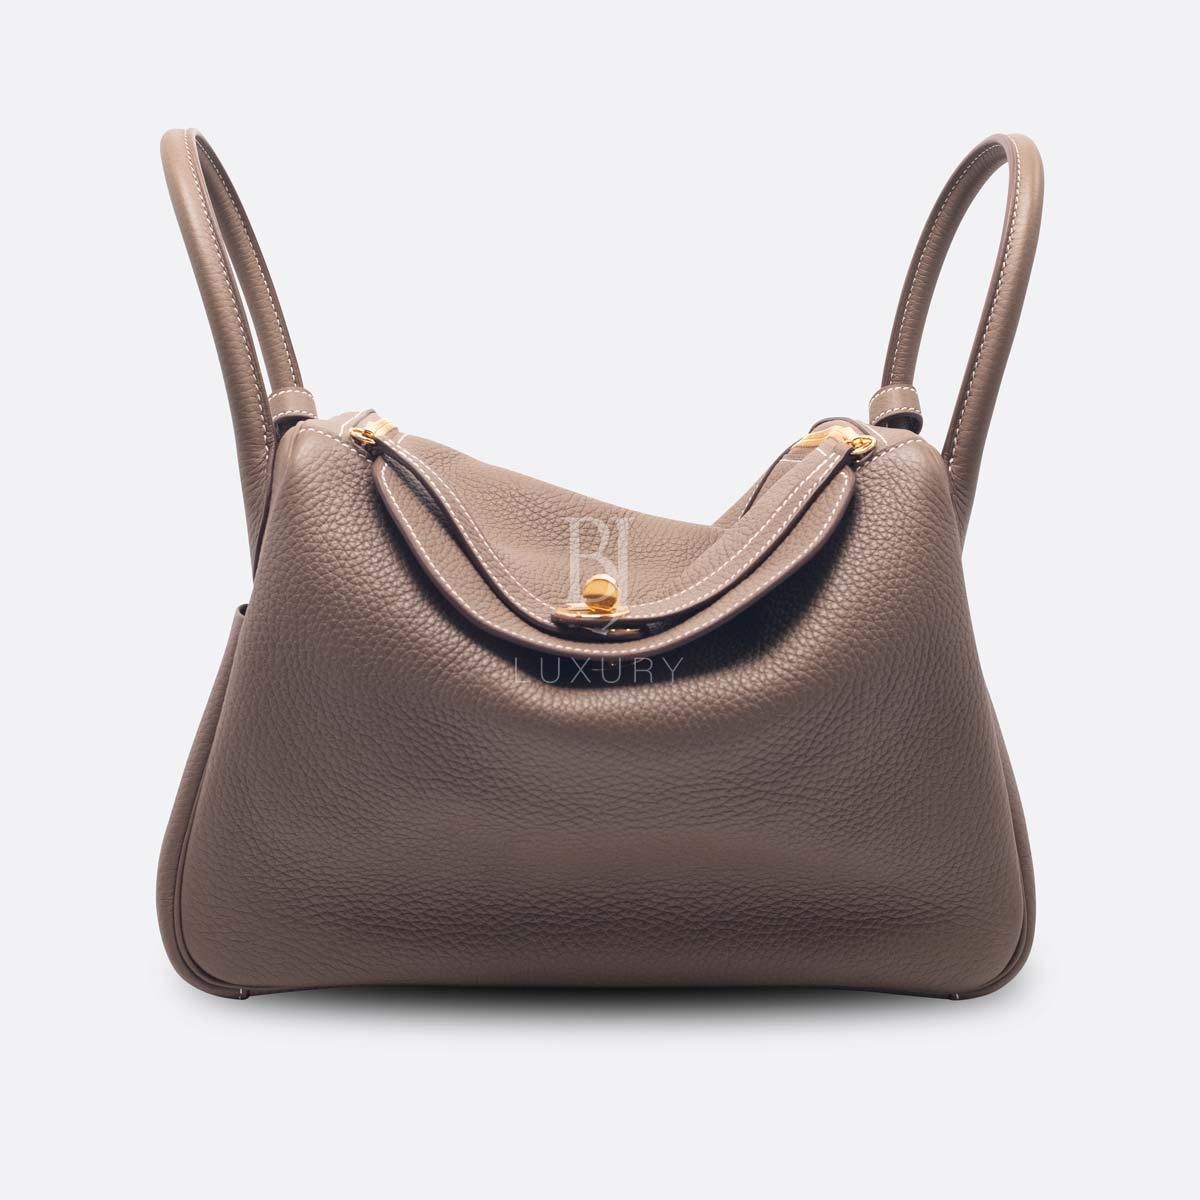 HERMES-LINDY-30-ETOUPE-CLEMENCE-5003-Front.jpg